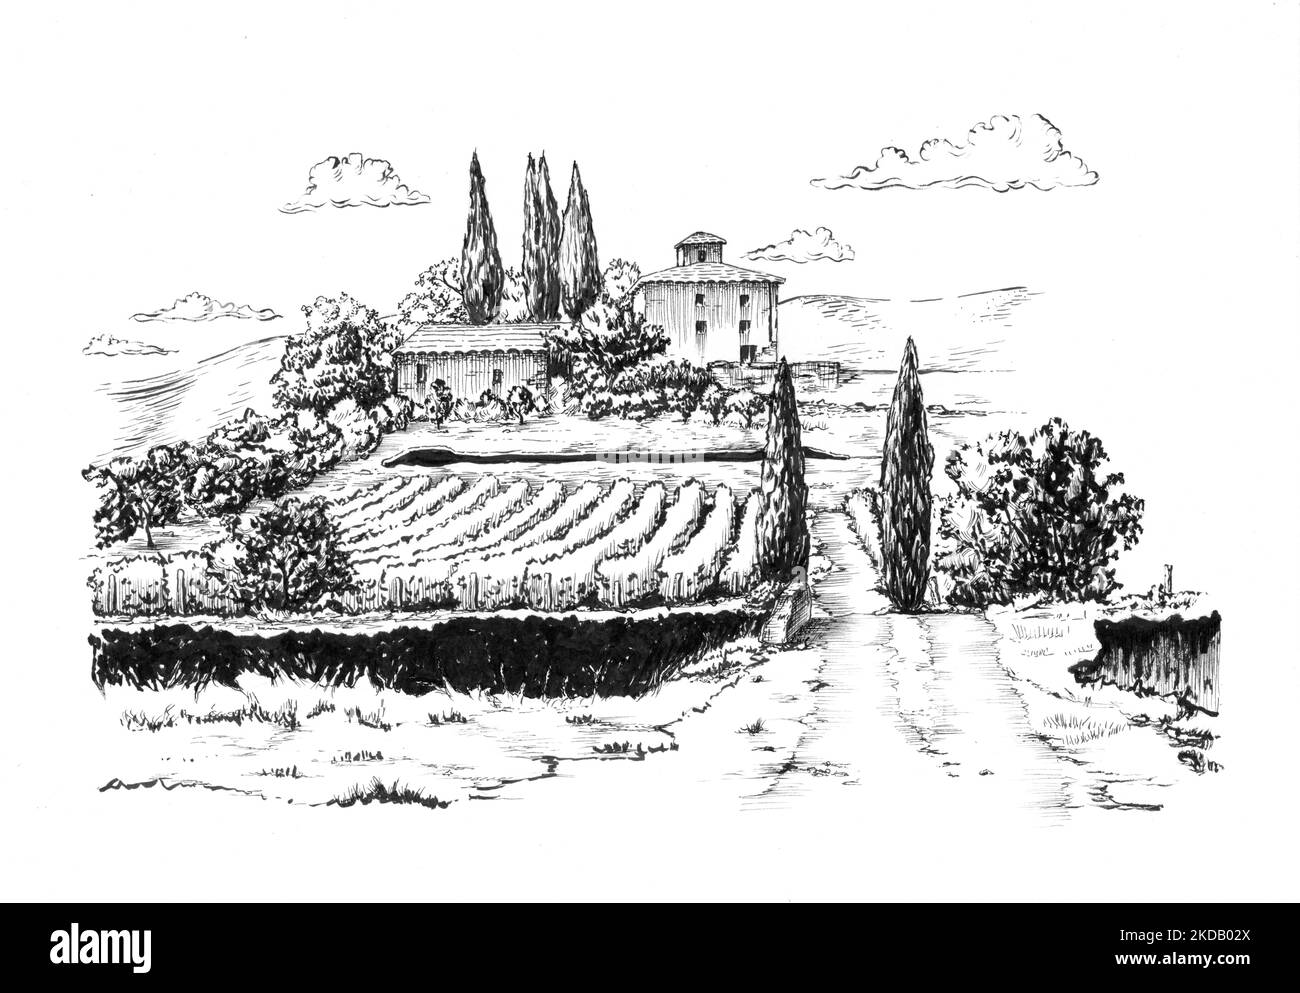 Ink drawing of a rural landscape with a vineyard. Traditional illustration on paper. Stock Photo